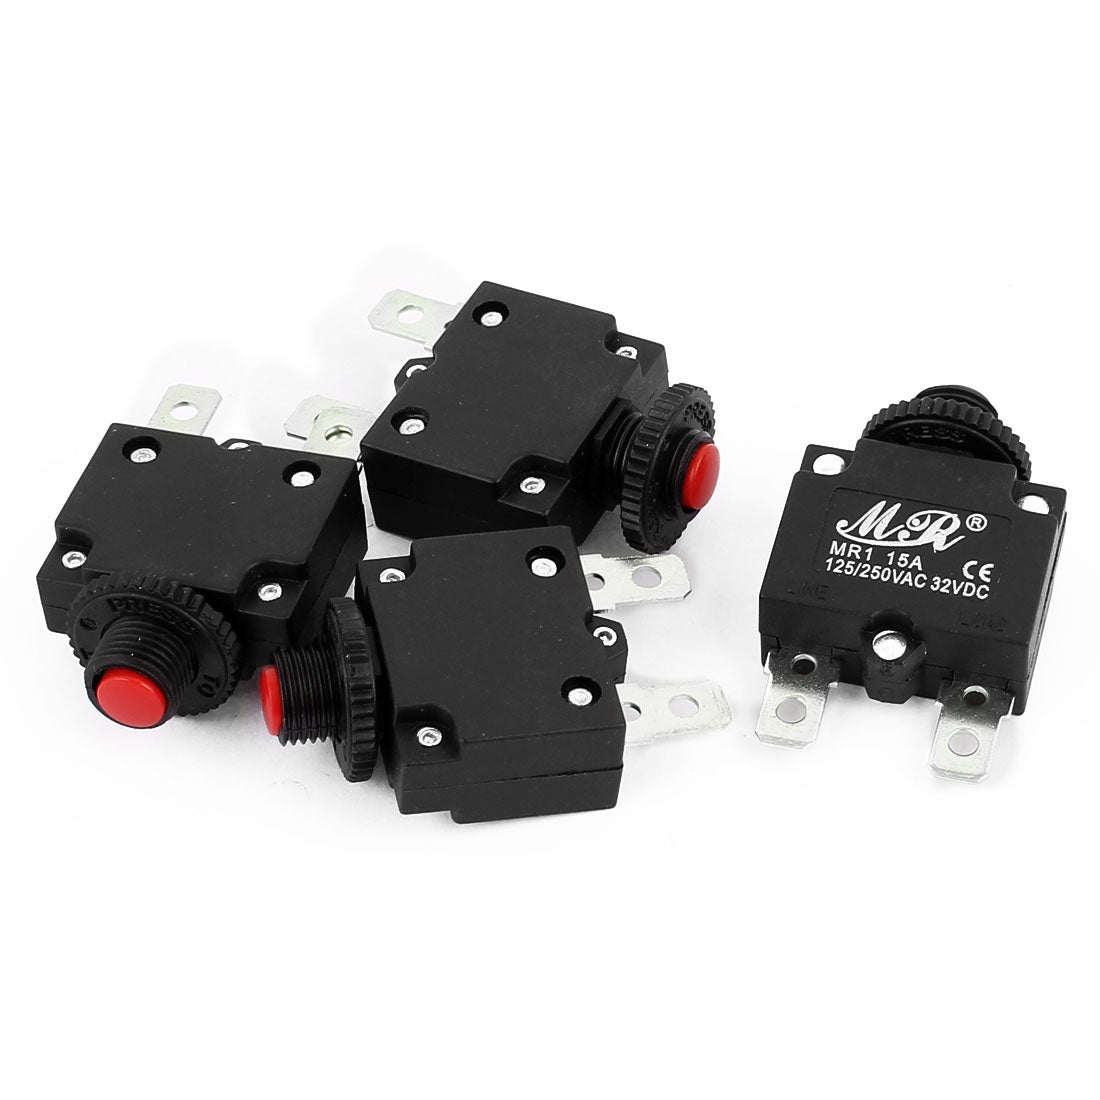 uxcell Uxcell 4Pcs MR1 AC 125/250V/32VDC 15A Circuit Breaker Current Overload Protector Switch Black